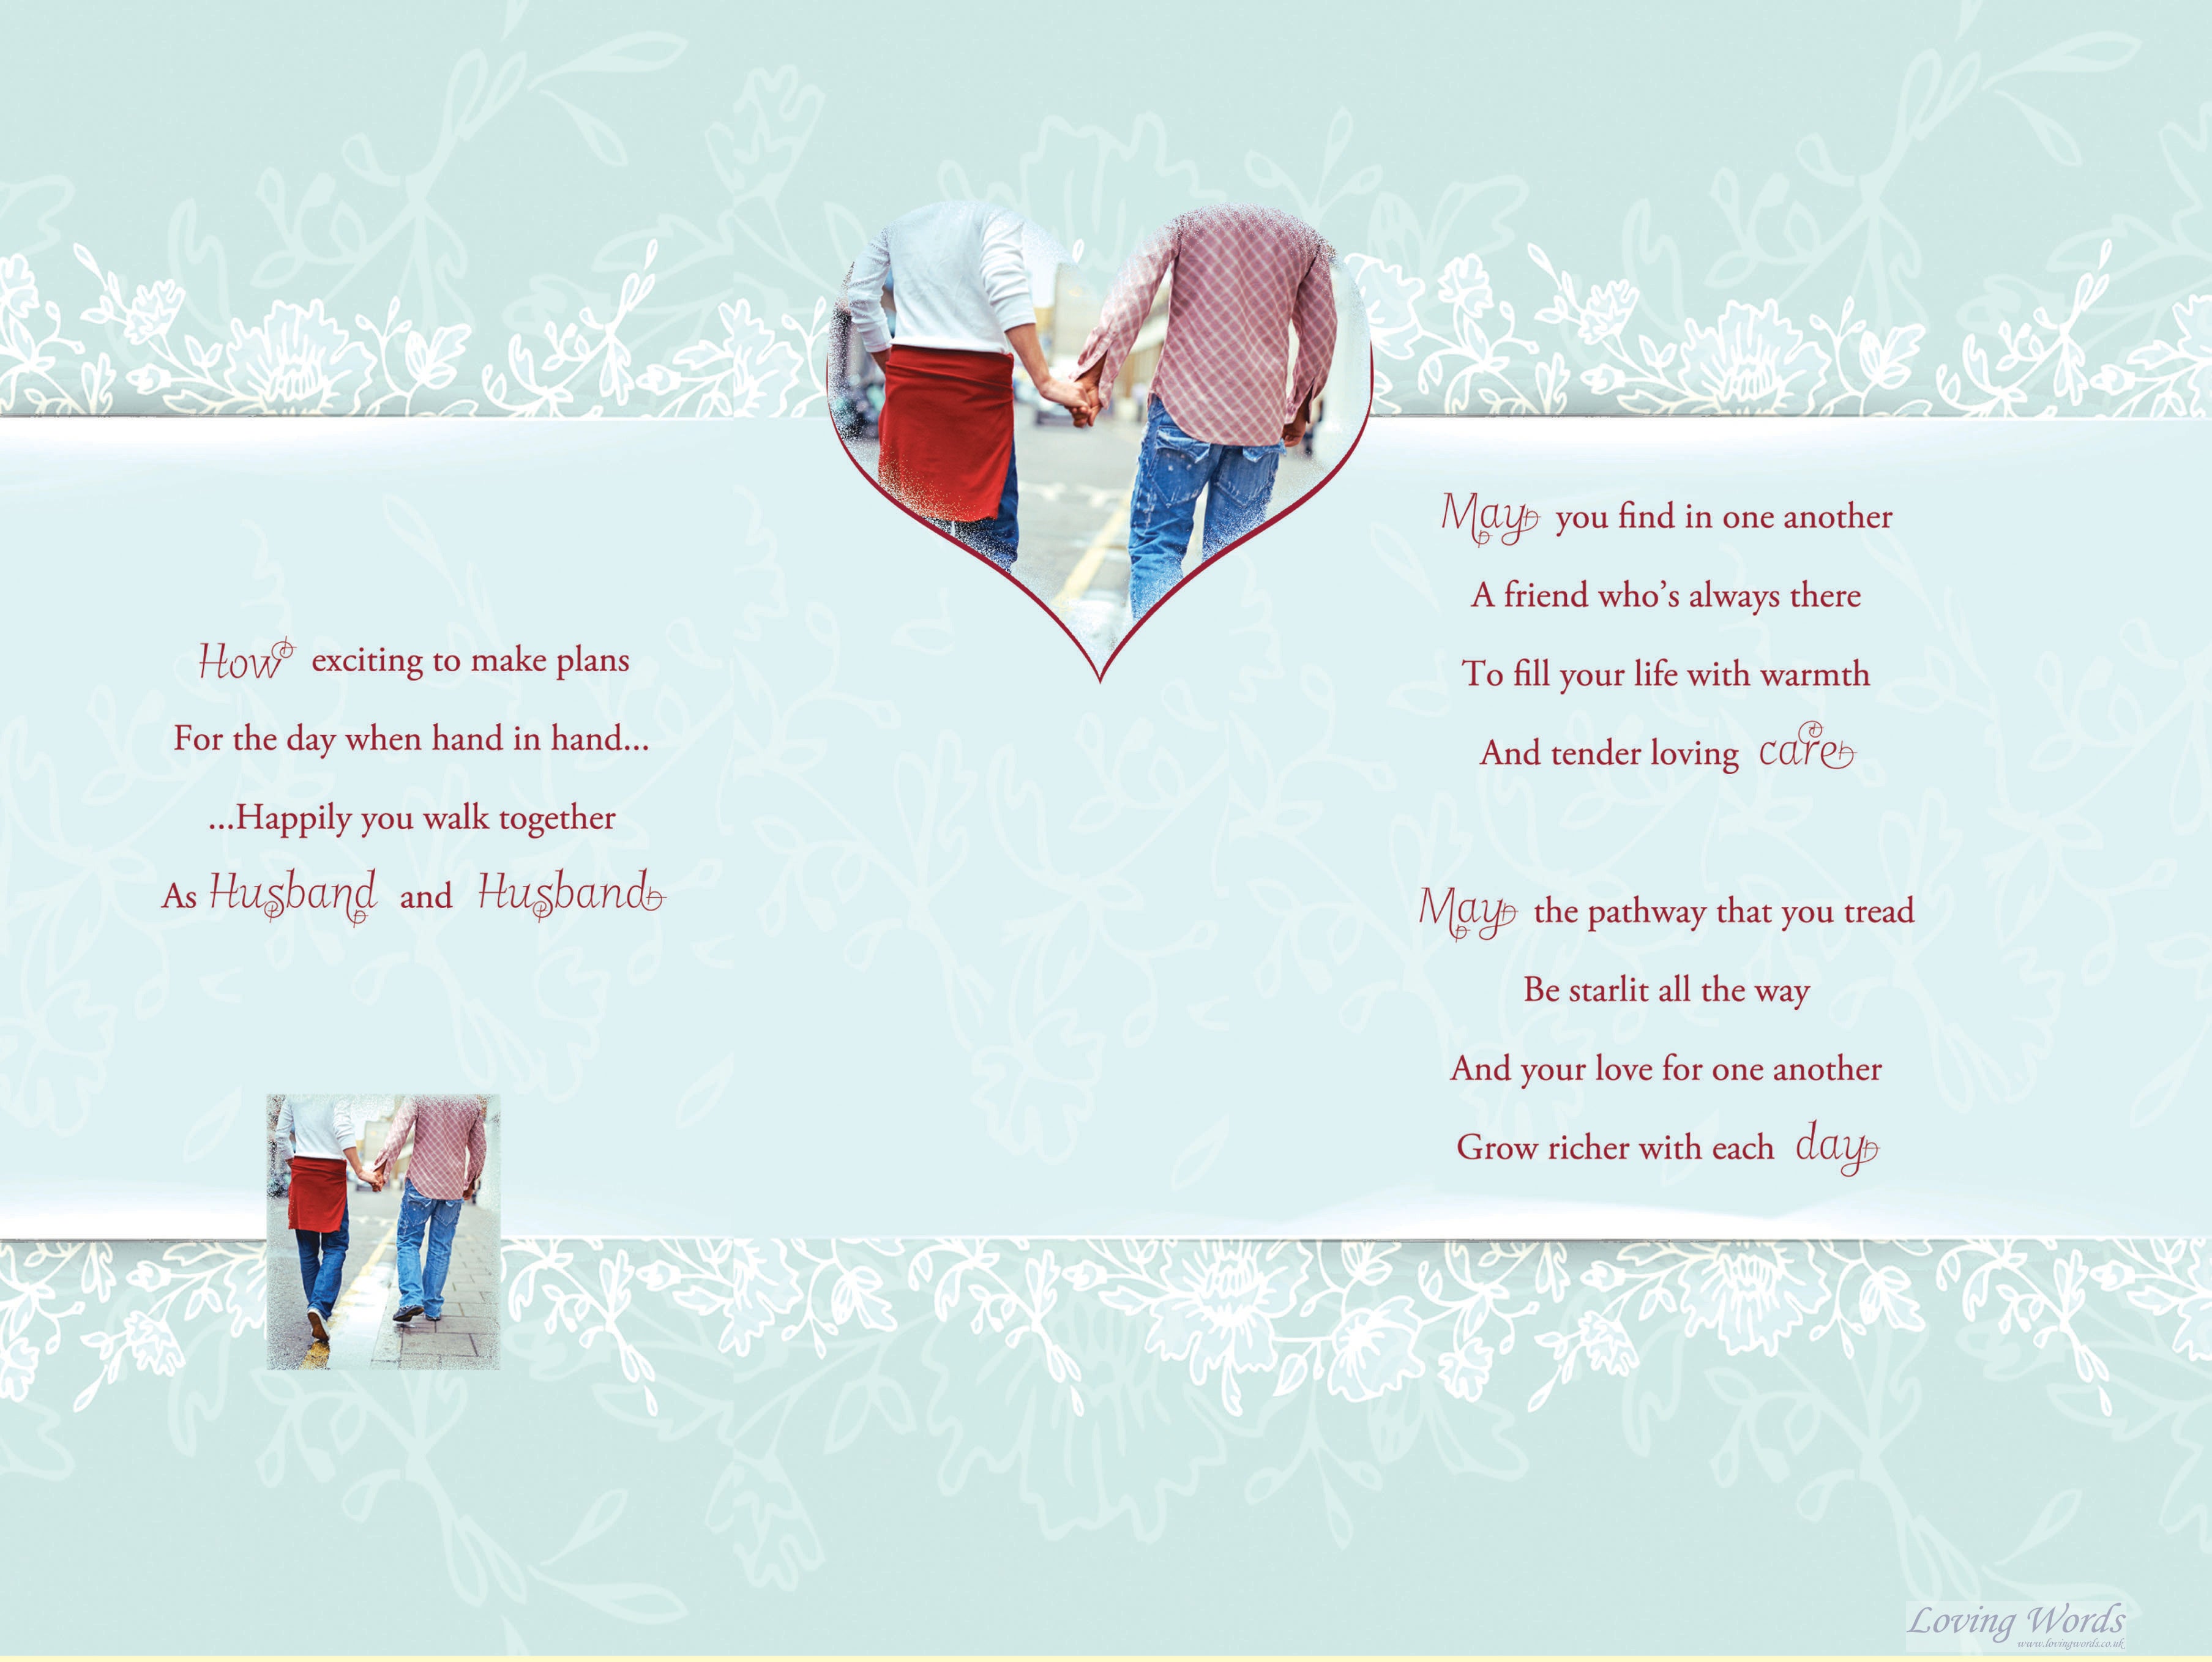 LGBTQ+ Male Couple Engagement Card - Congratulations on Your Wonderful News!